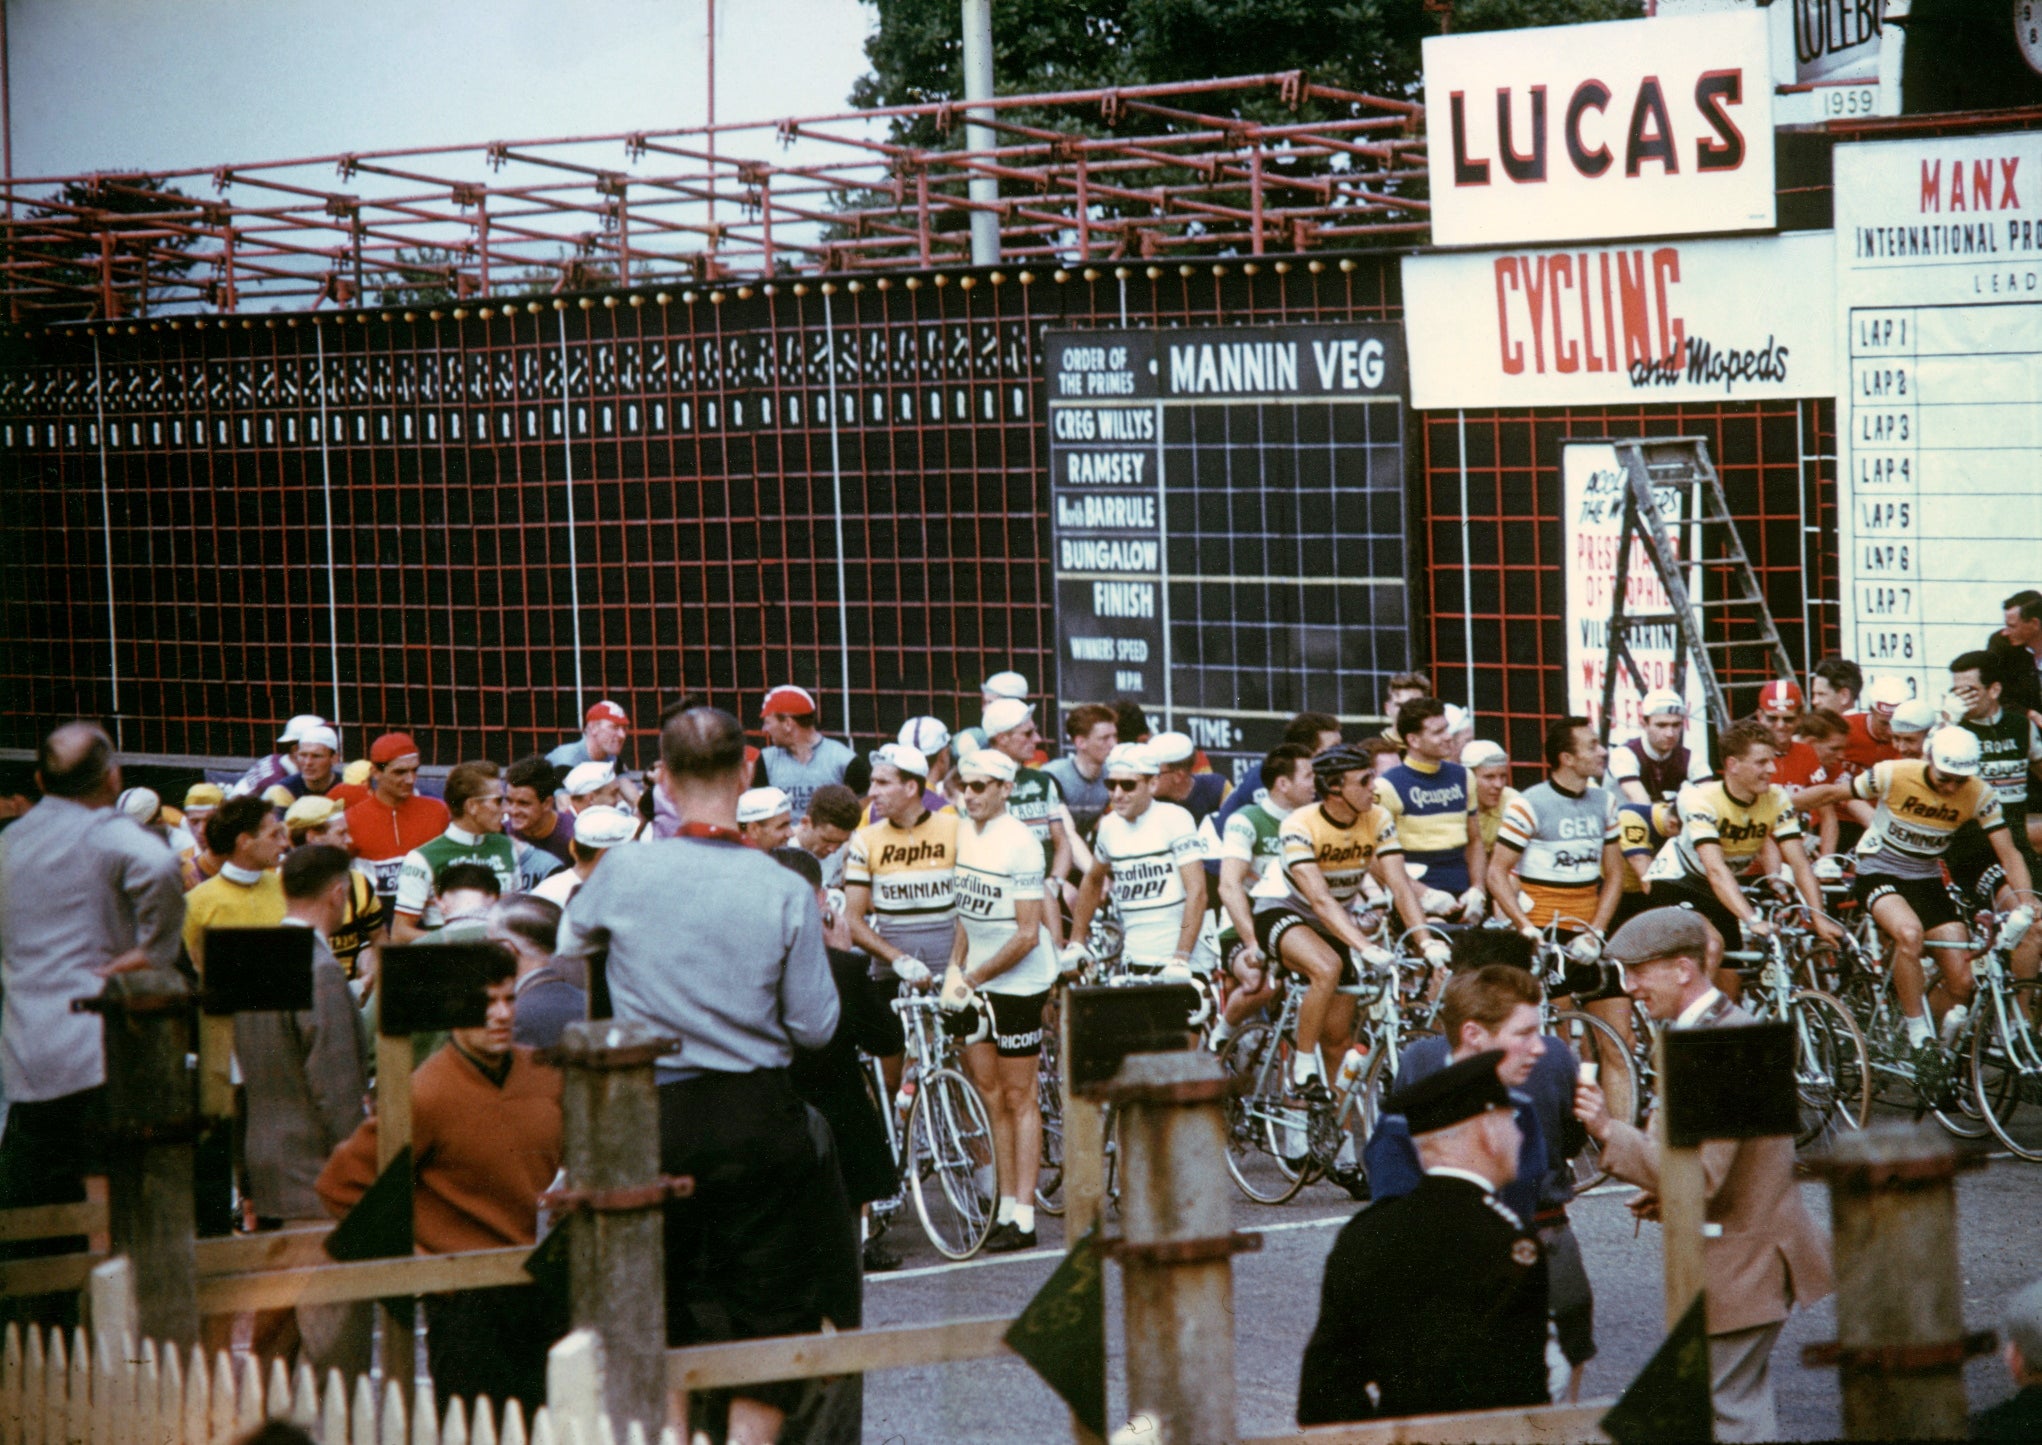 The start of the 1959 Manx Premier, Coppi centre, Anquetil in green on left.